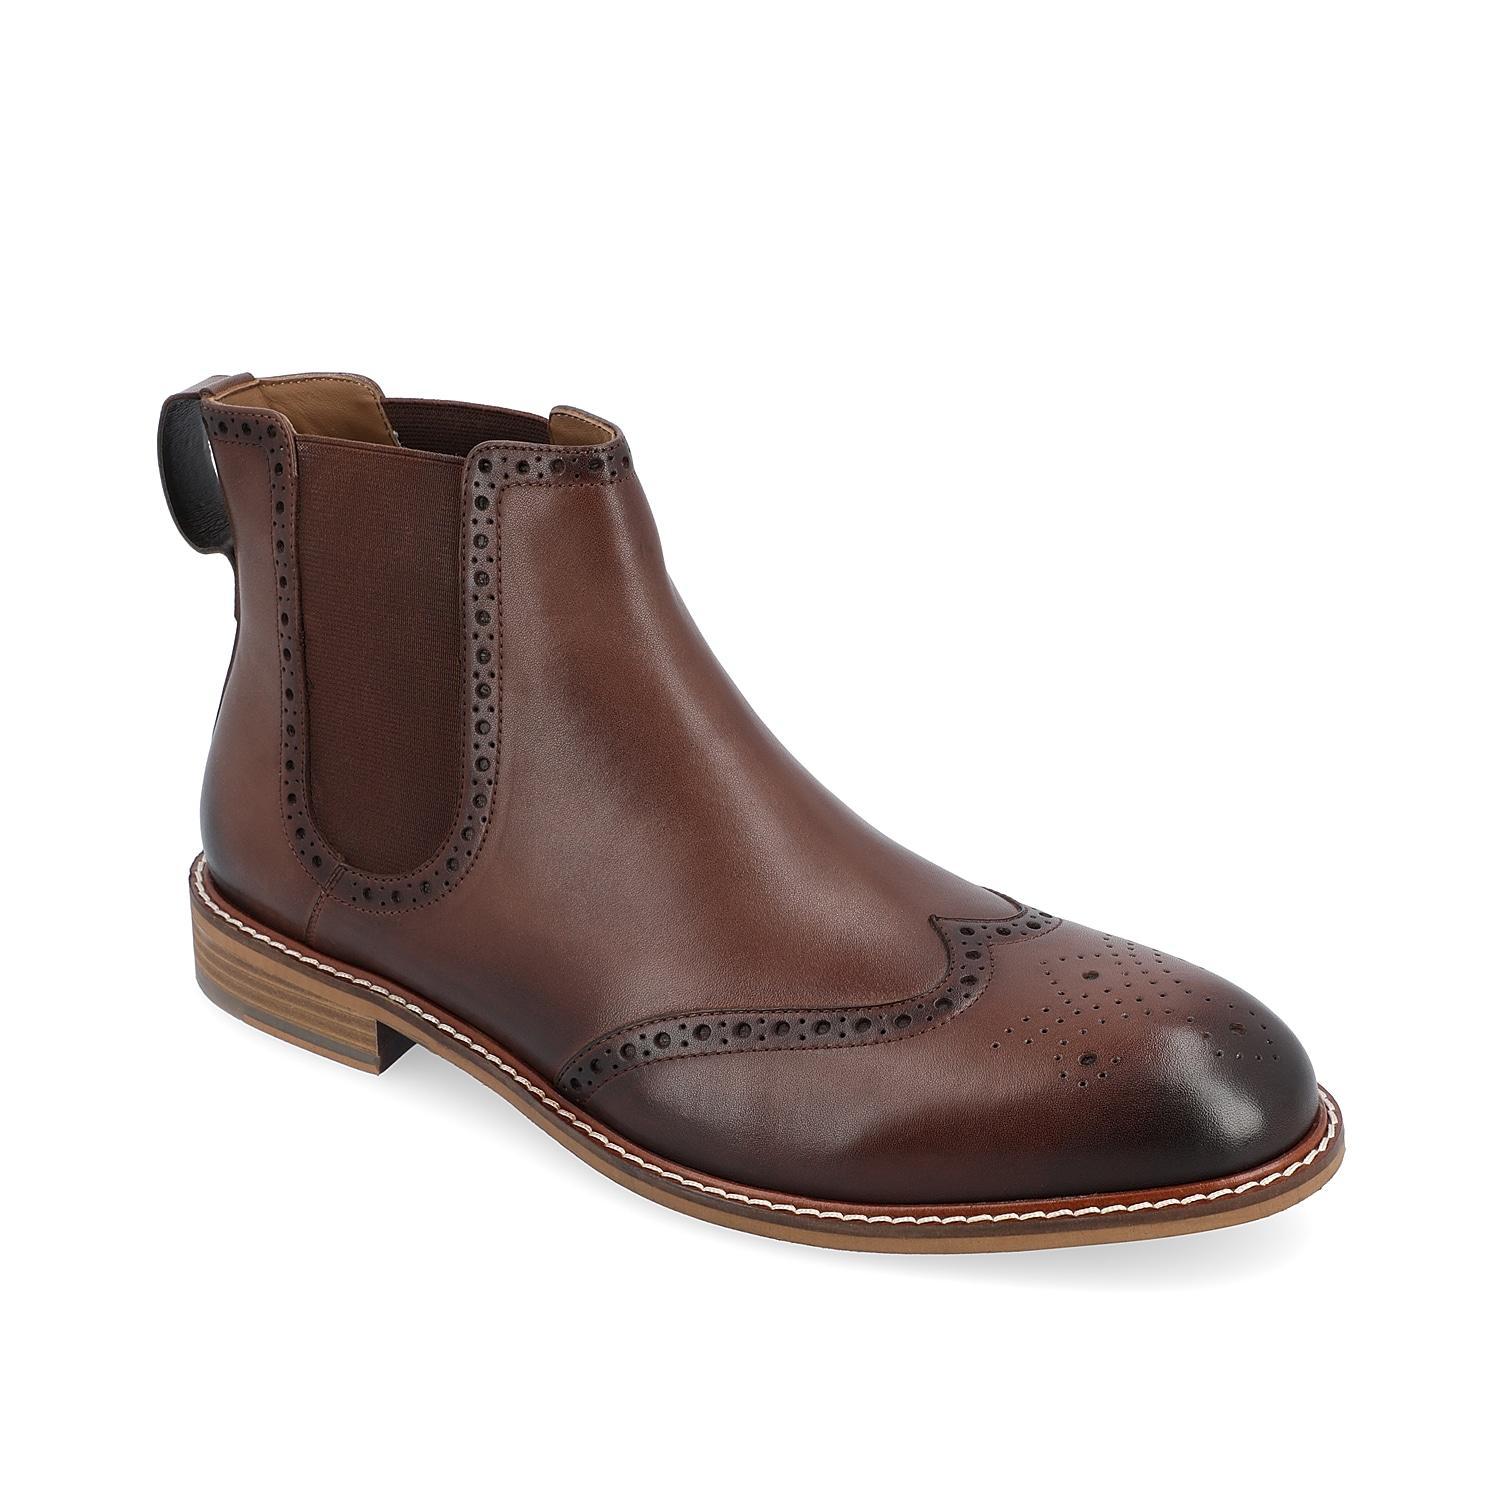 Thomas & Vine Watson Wing Tip Chelsea Boot Men's Shoes Product Image